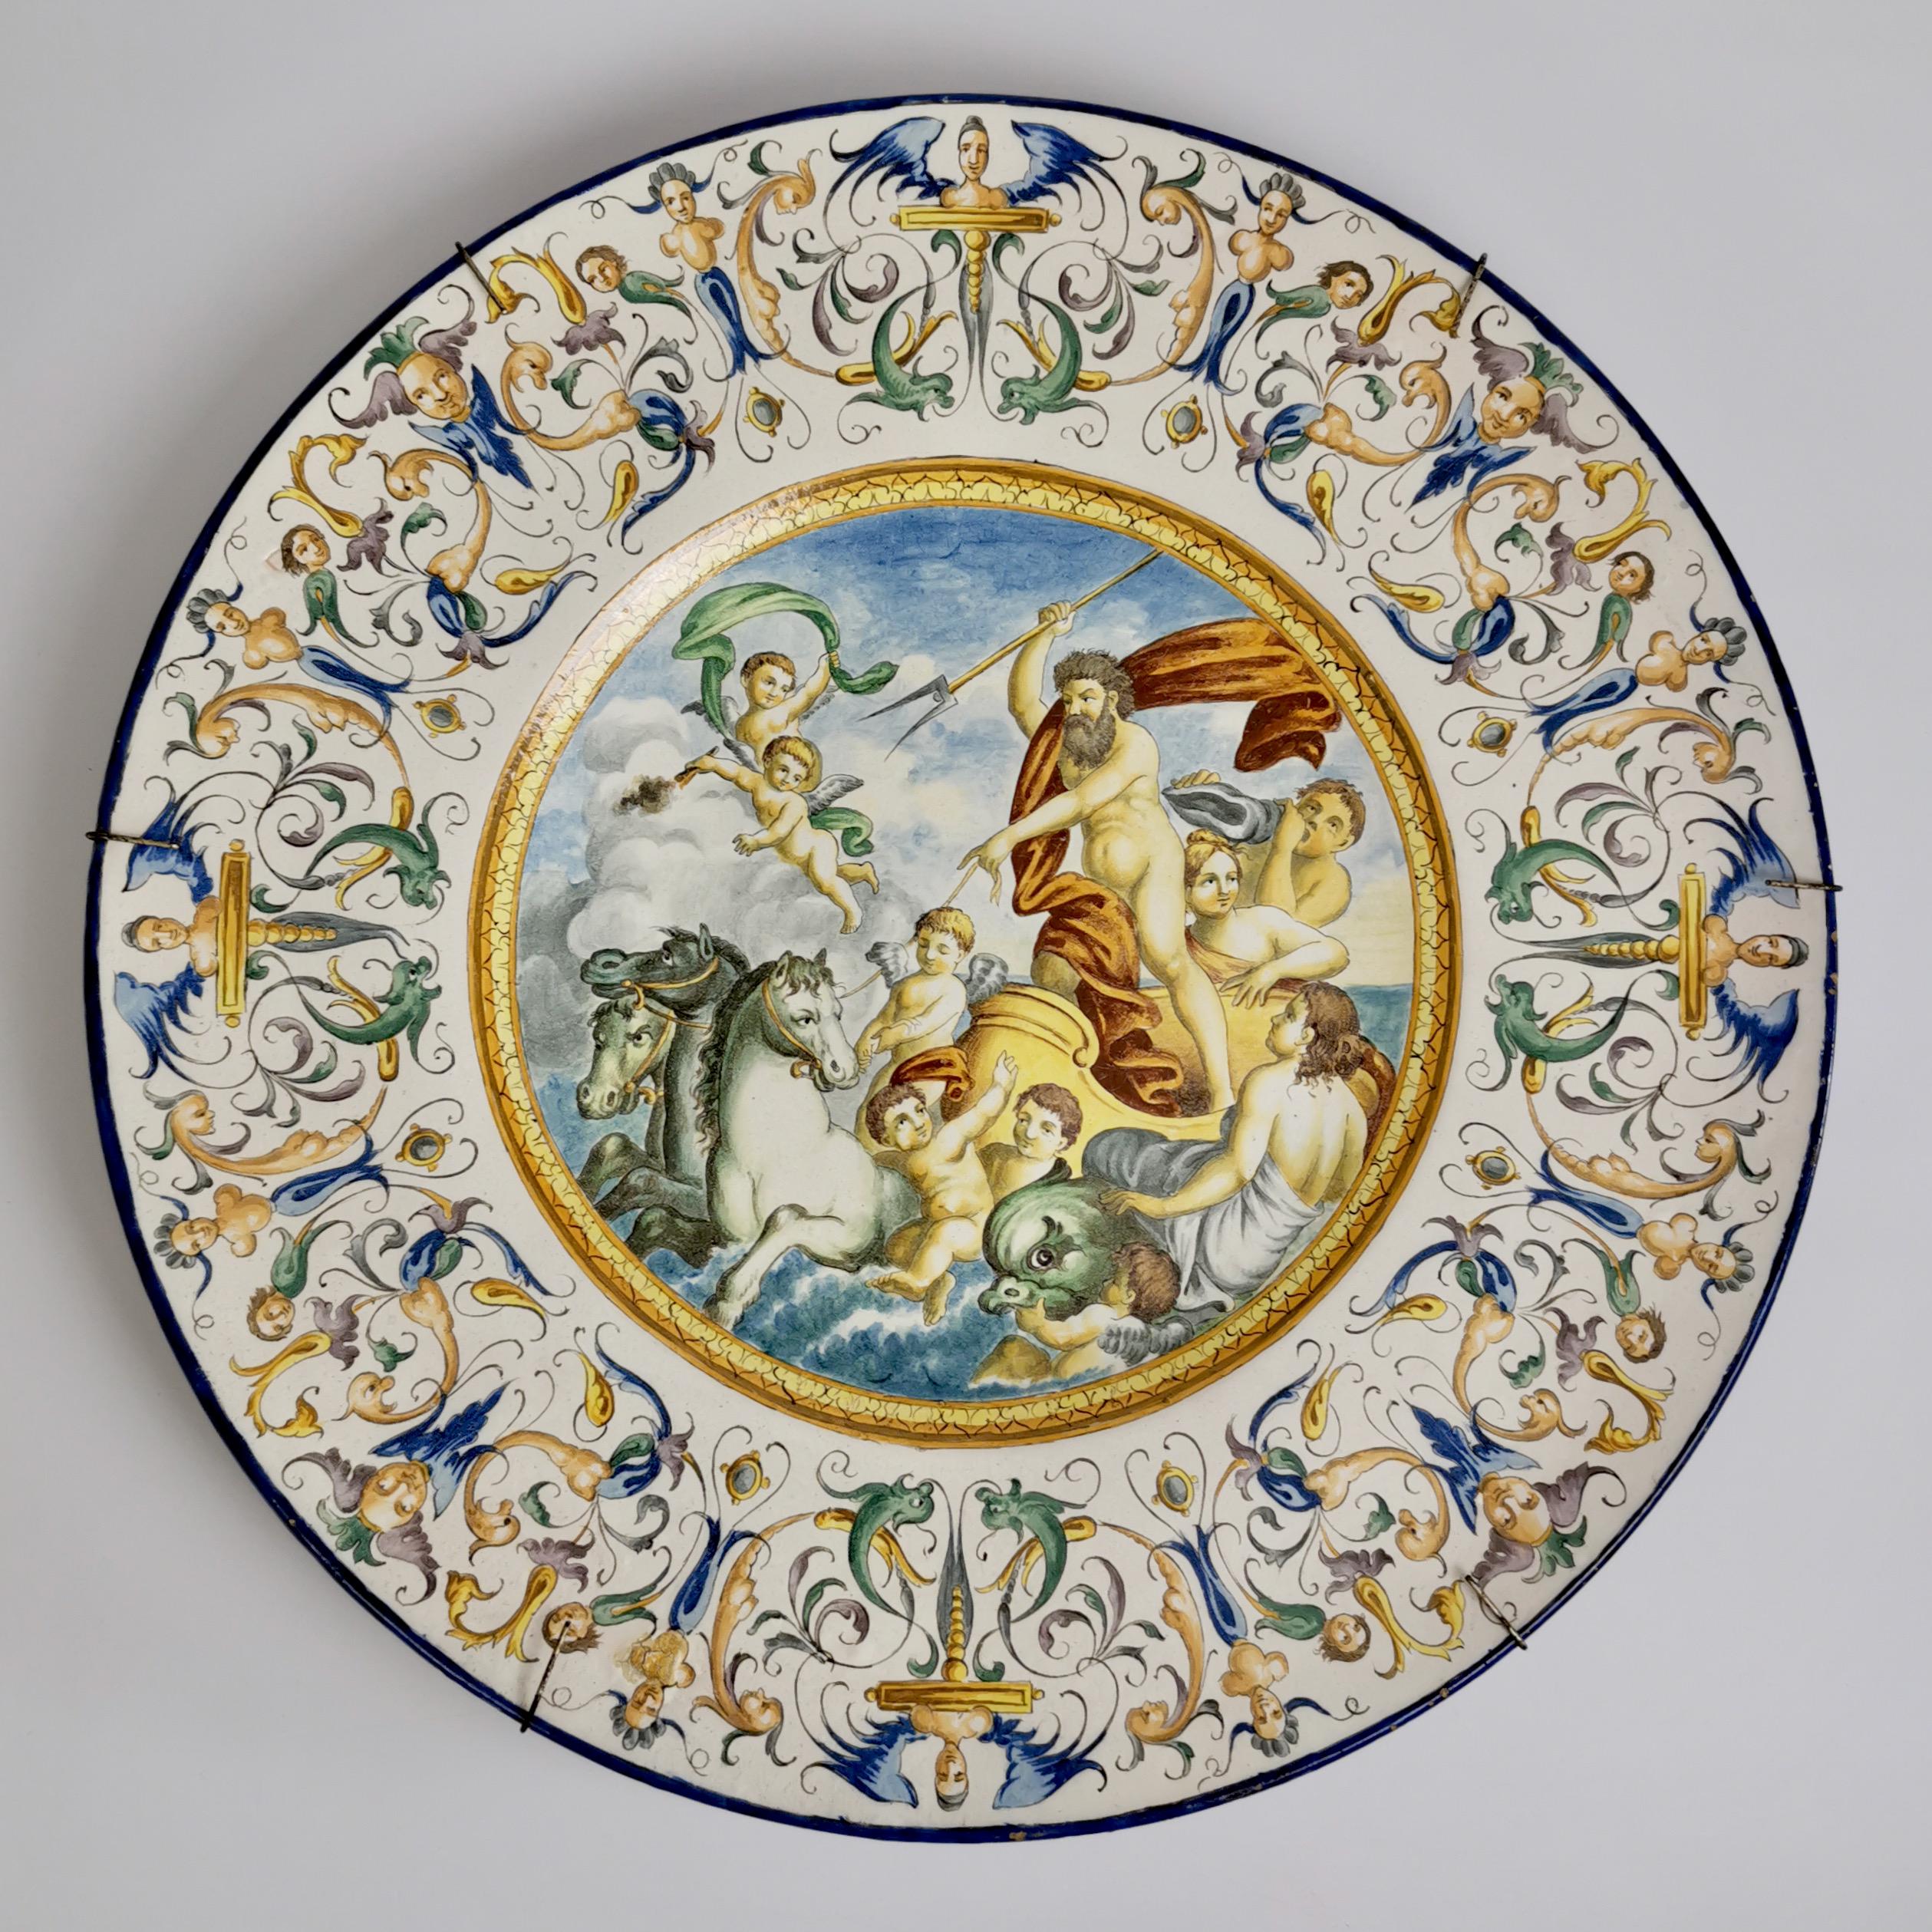 On offer is a wonderful pair of huge Italian maiolica chargers made in the 19th Century. The chargers are painted with lively scenes of Neptune and Venus in carriages drawn by horses and hippocampi. They are surrounded by all manner of putti and